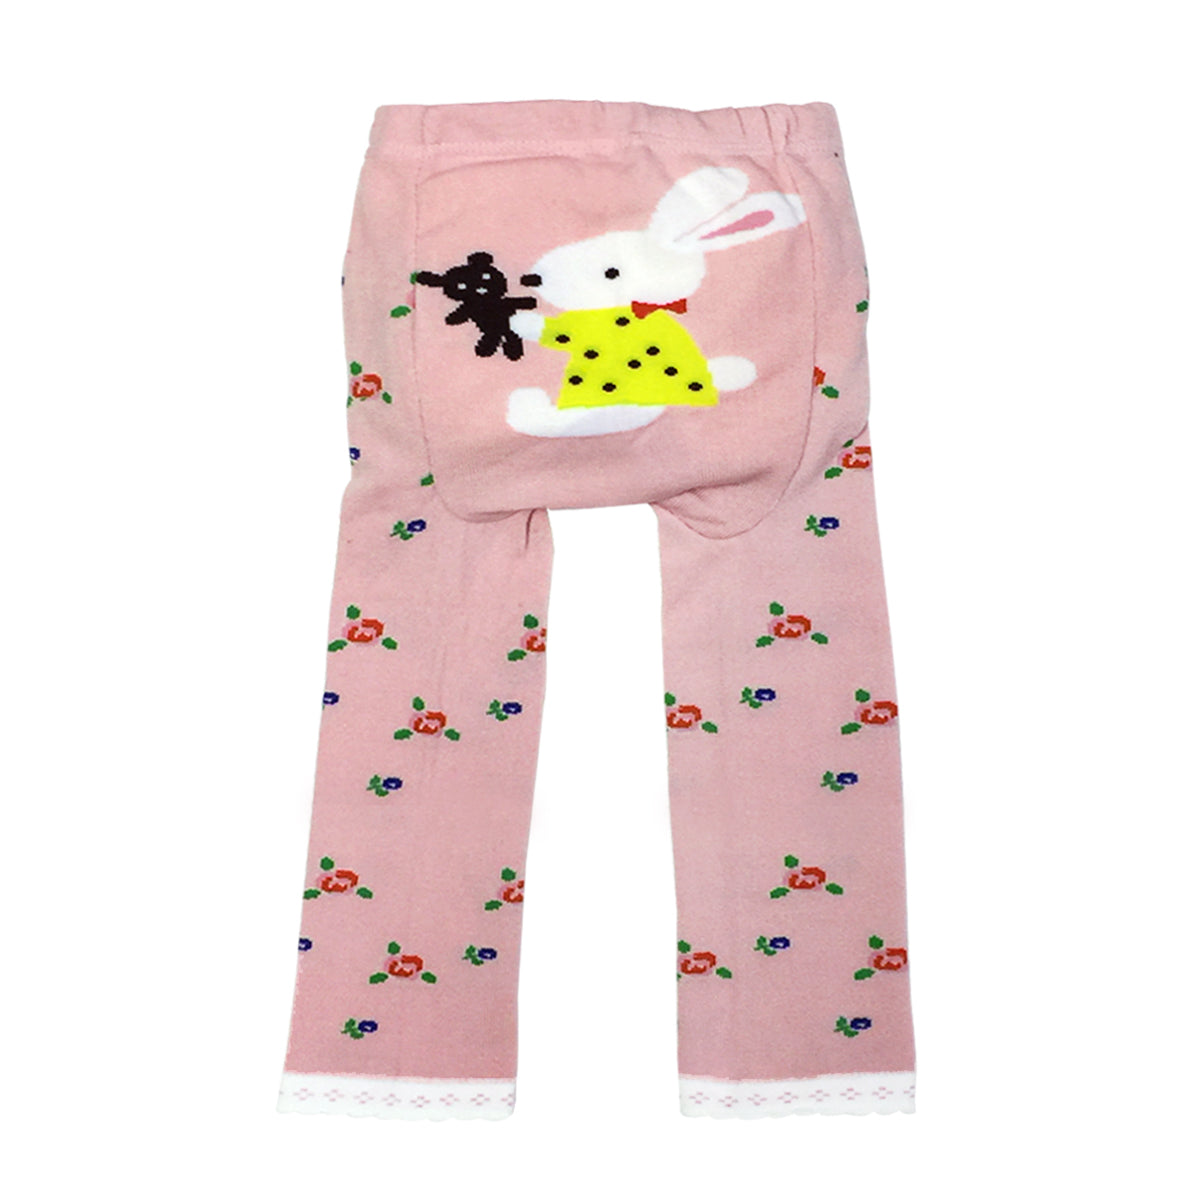 Wrapables Baby and Toddler Animal Leggings (Set of 3), 24 to 36 months, Pink and Yellow